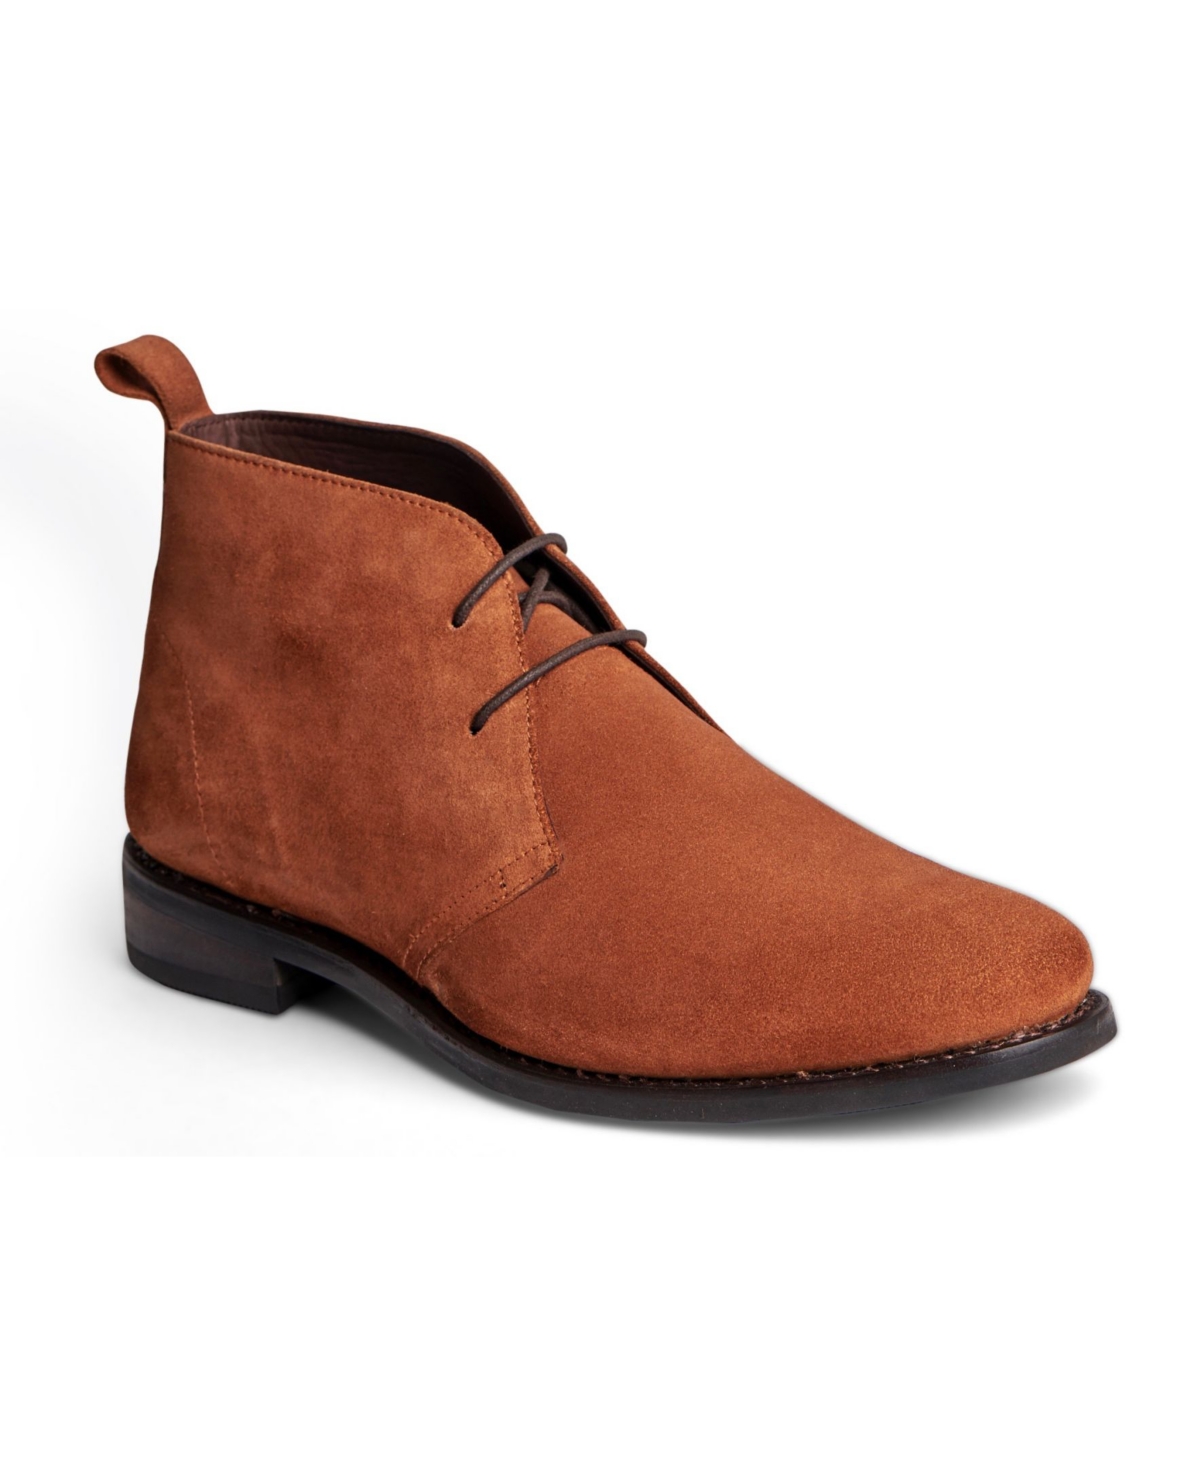 Anthony Veer Men's Arthur Suede Leather Chukka Boots In Camel